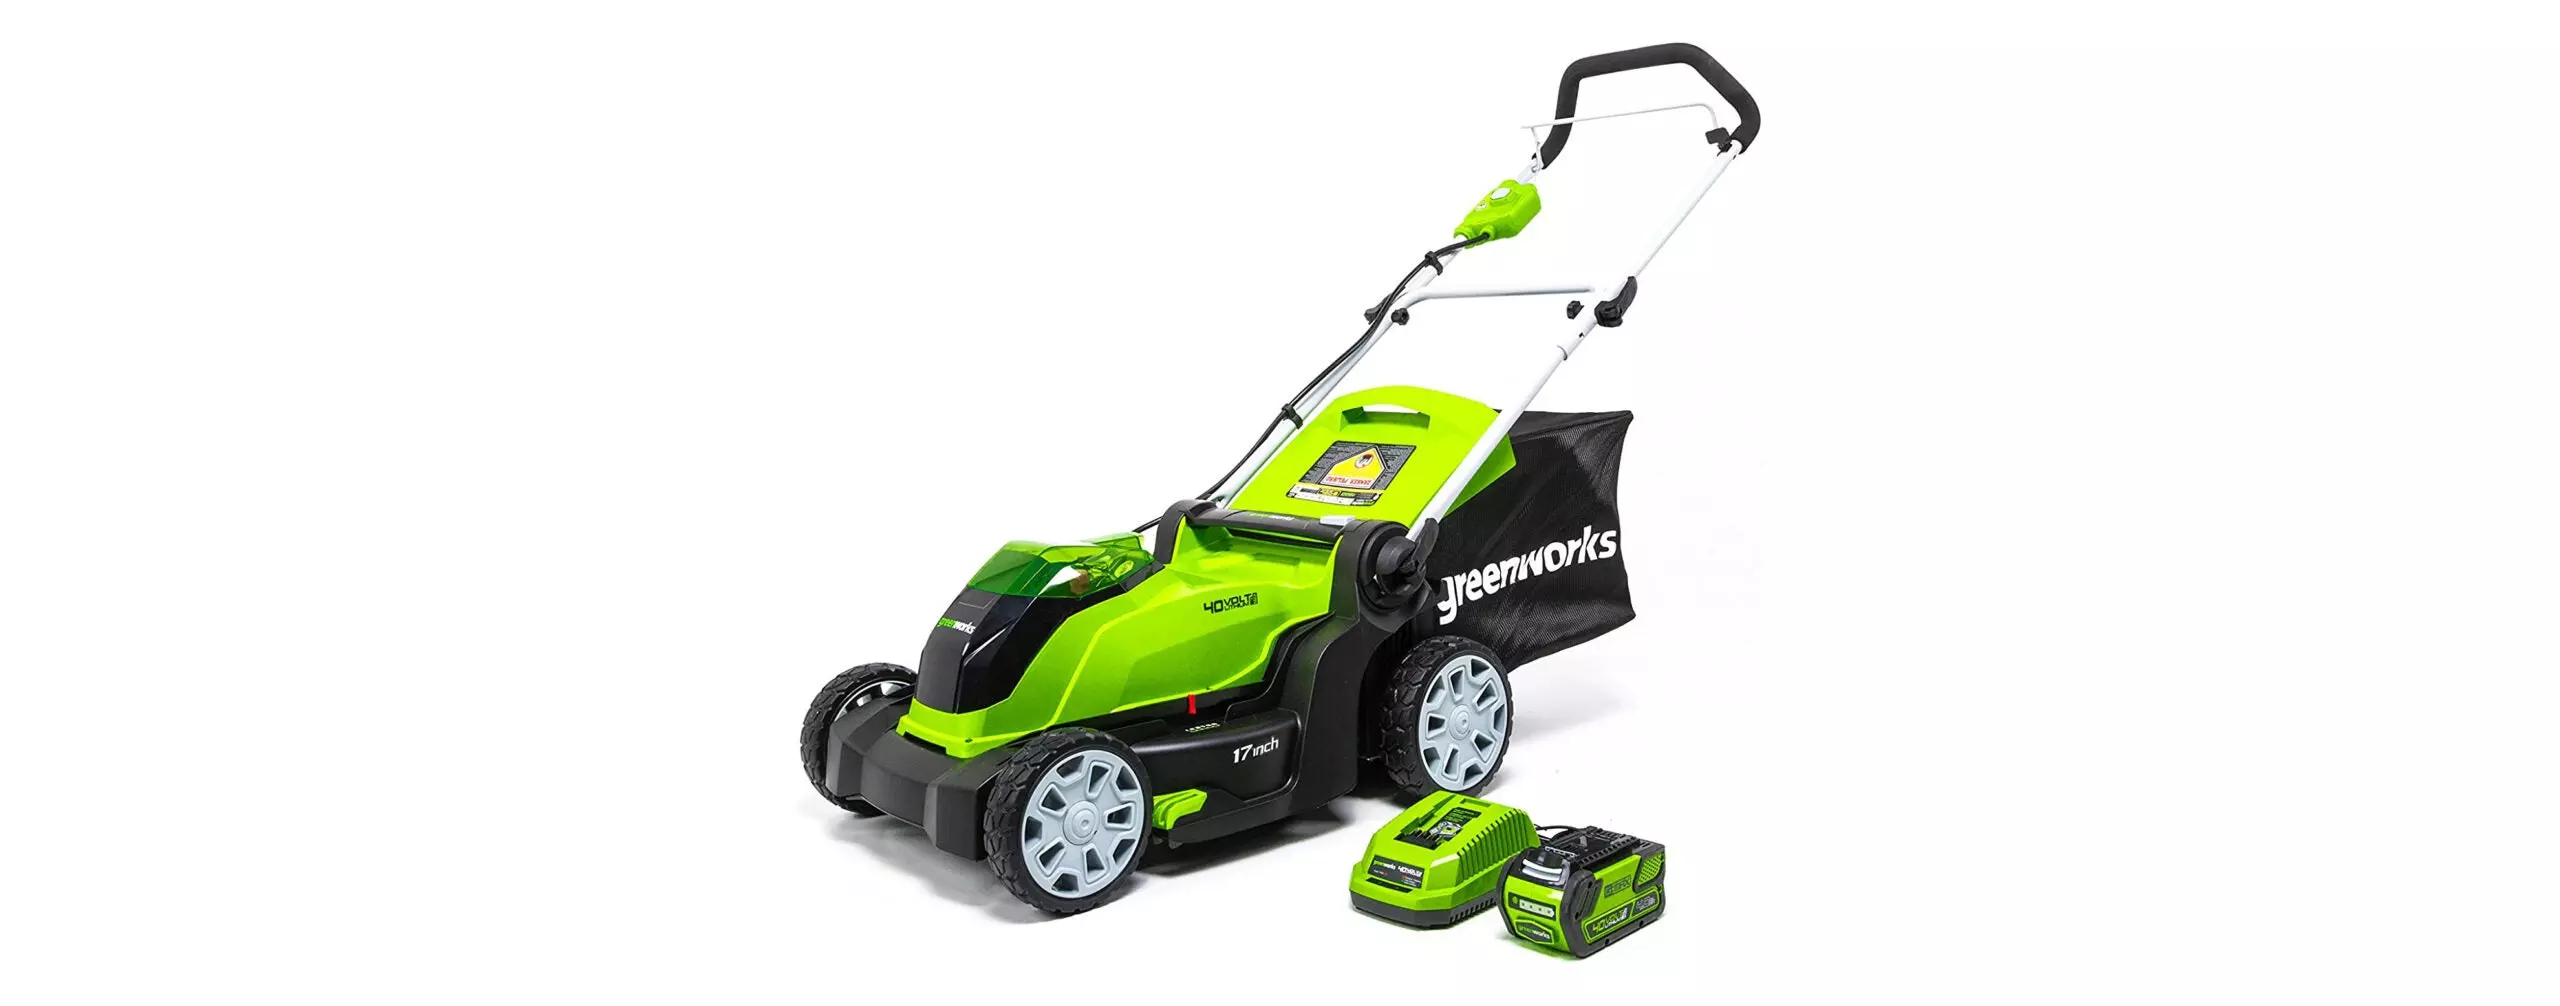 The Best Battery Powered Lawn Mowers ( (Review and Buying Guide) in 2022